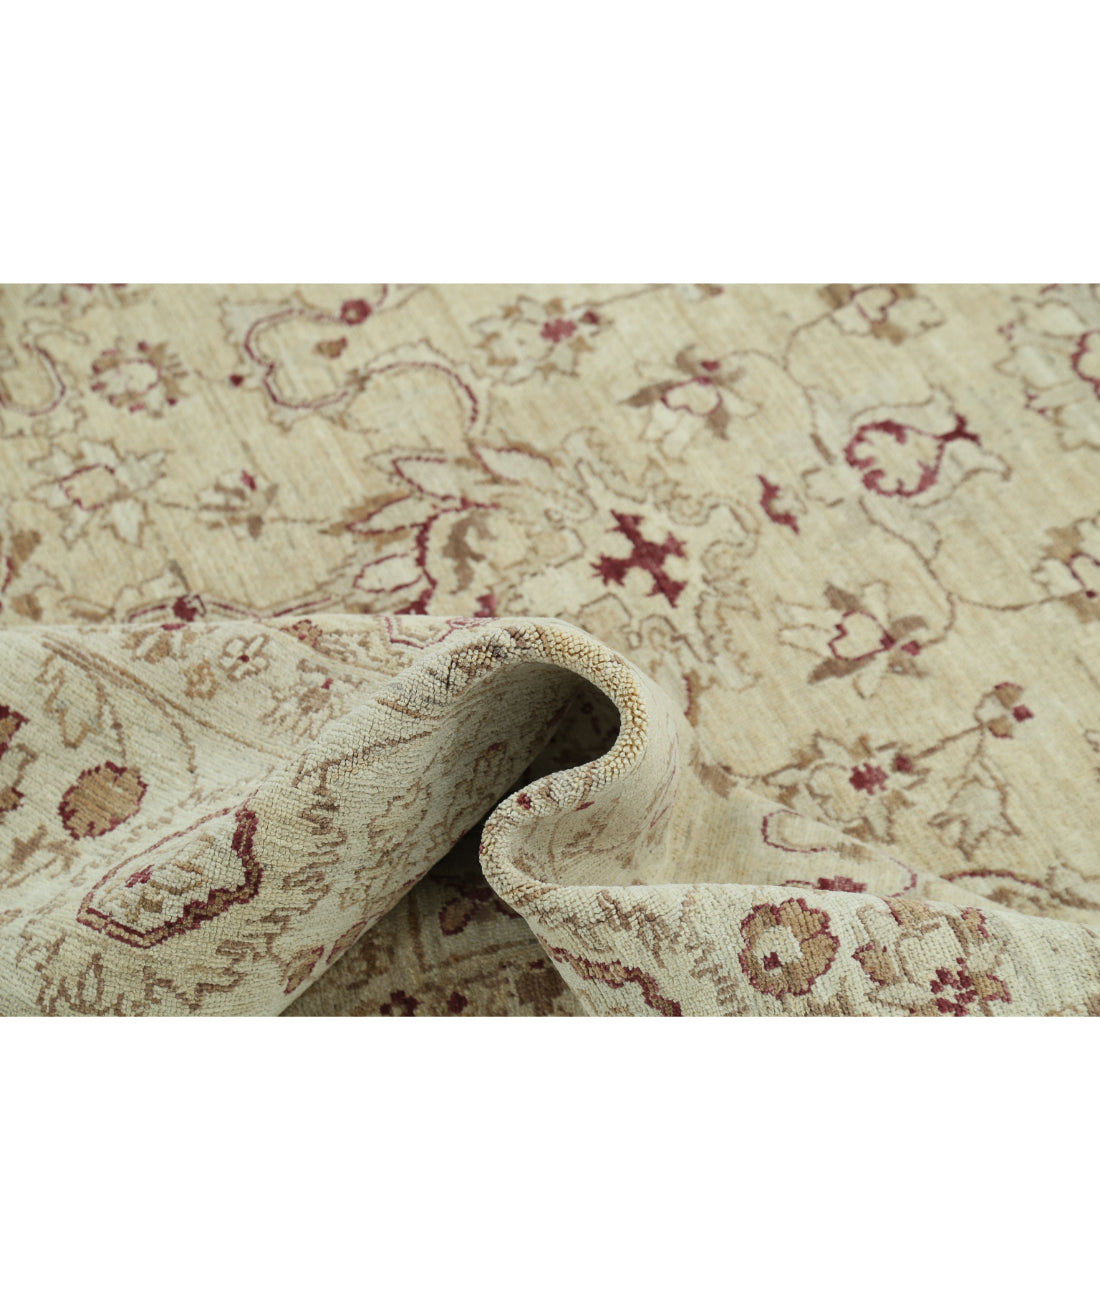 Hand Knotted Serenity Wool Rug - 7'10'' x 9'4'' 7'10'' x 9'4'' (235 X 280) / Beige / Ivory